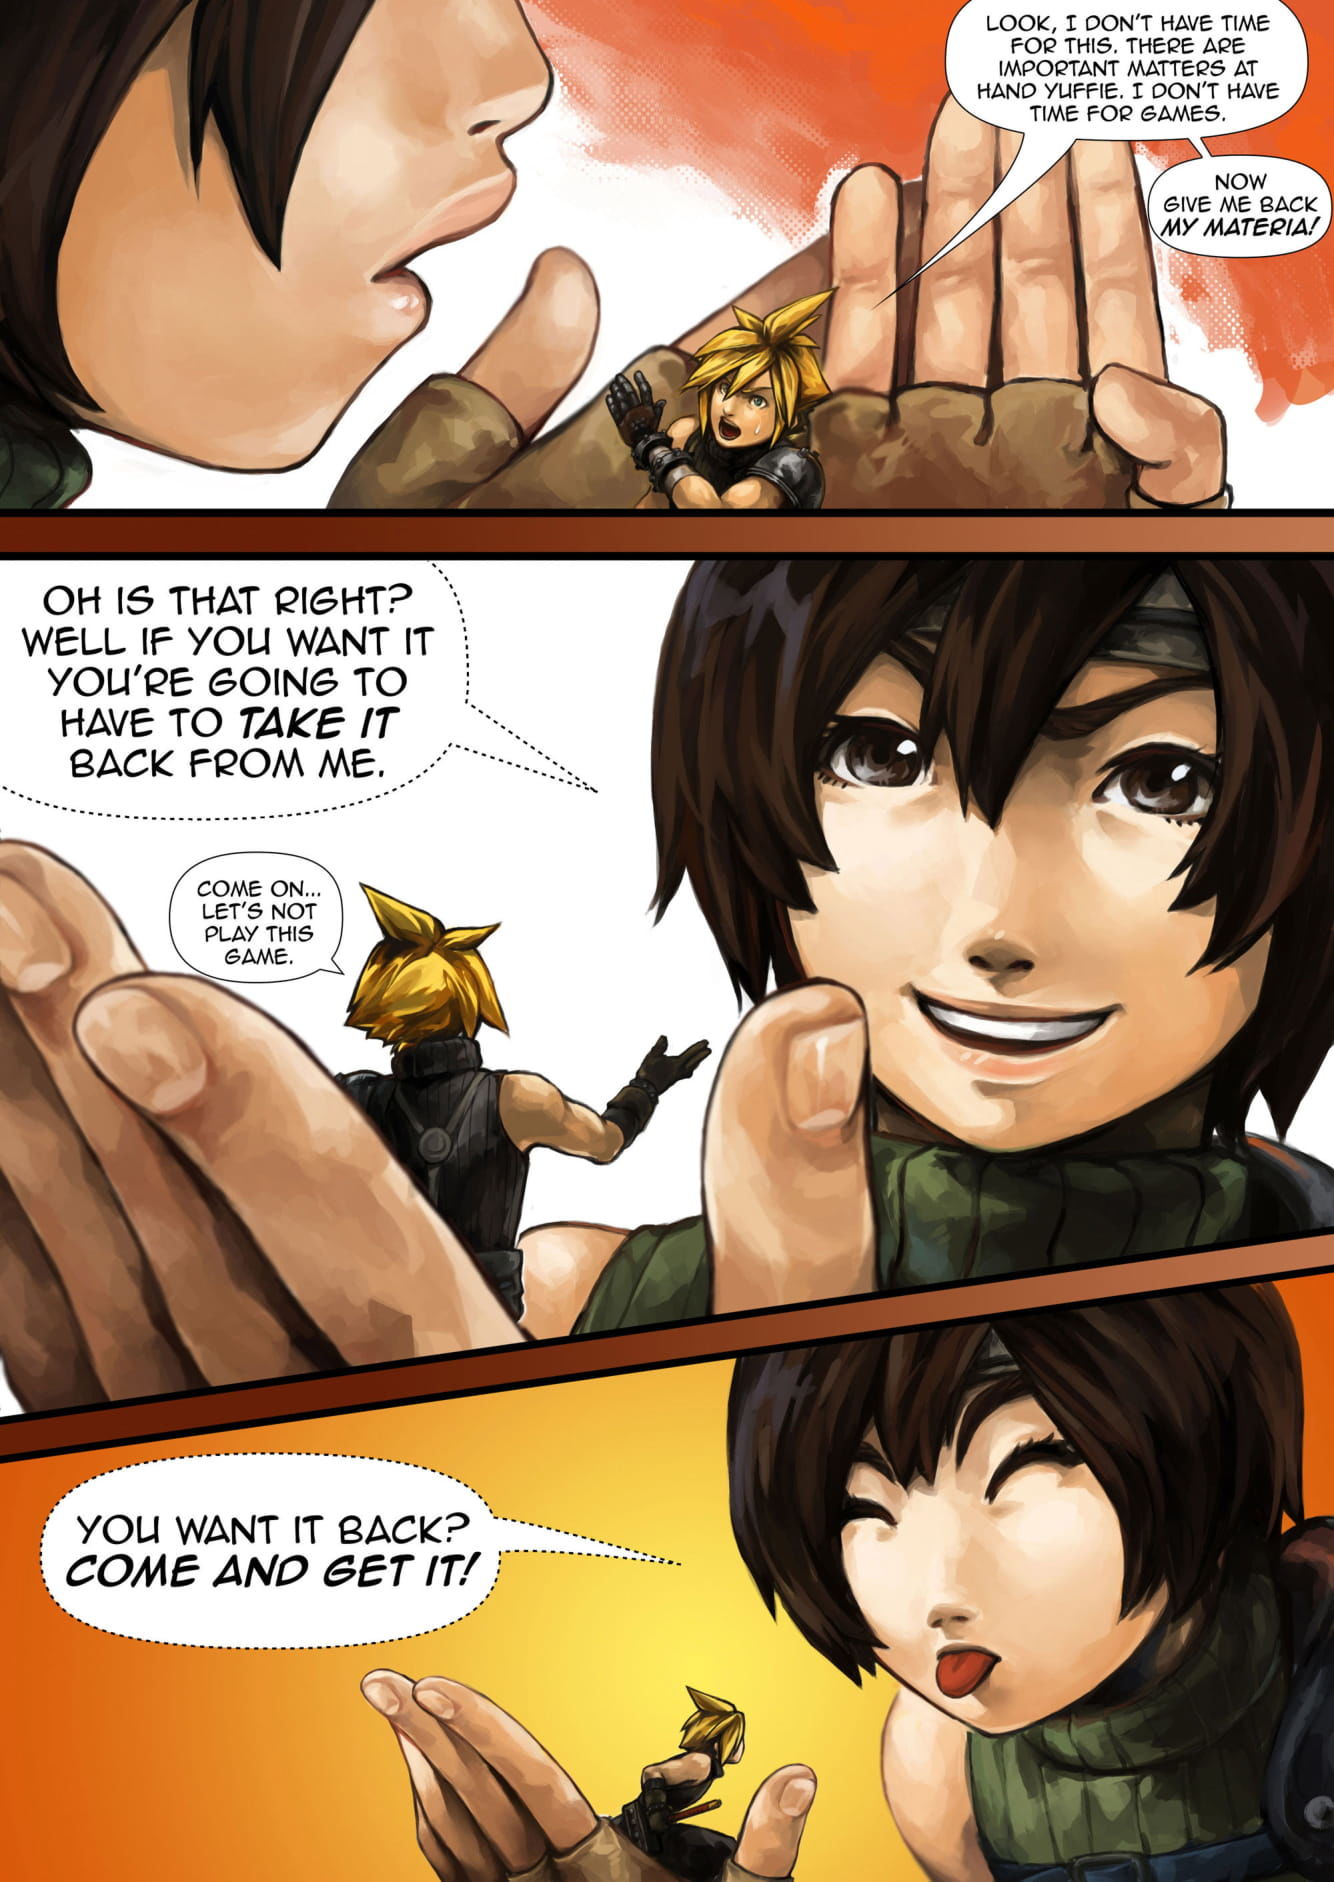 Growth Materia 1 & 2 by GiantessFan page 8